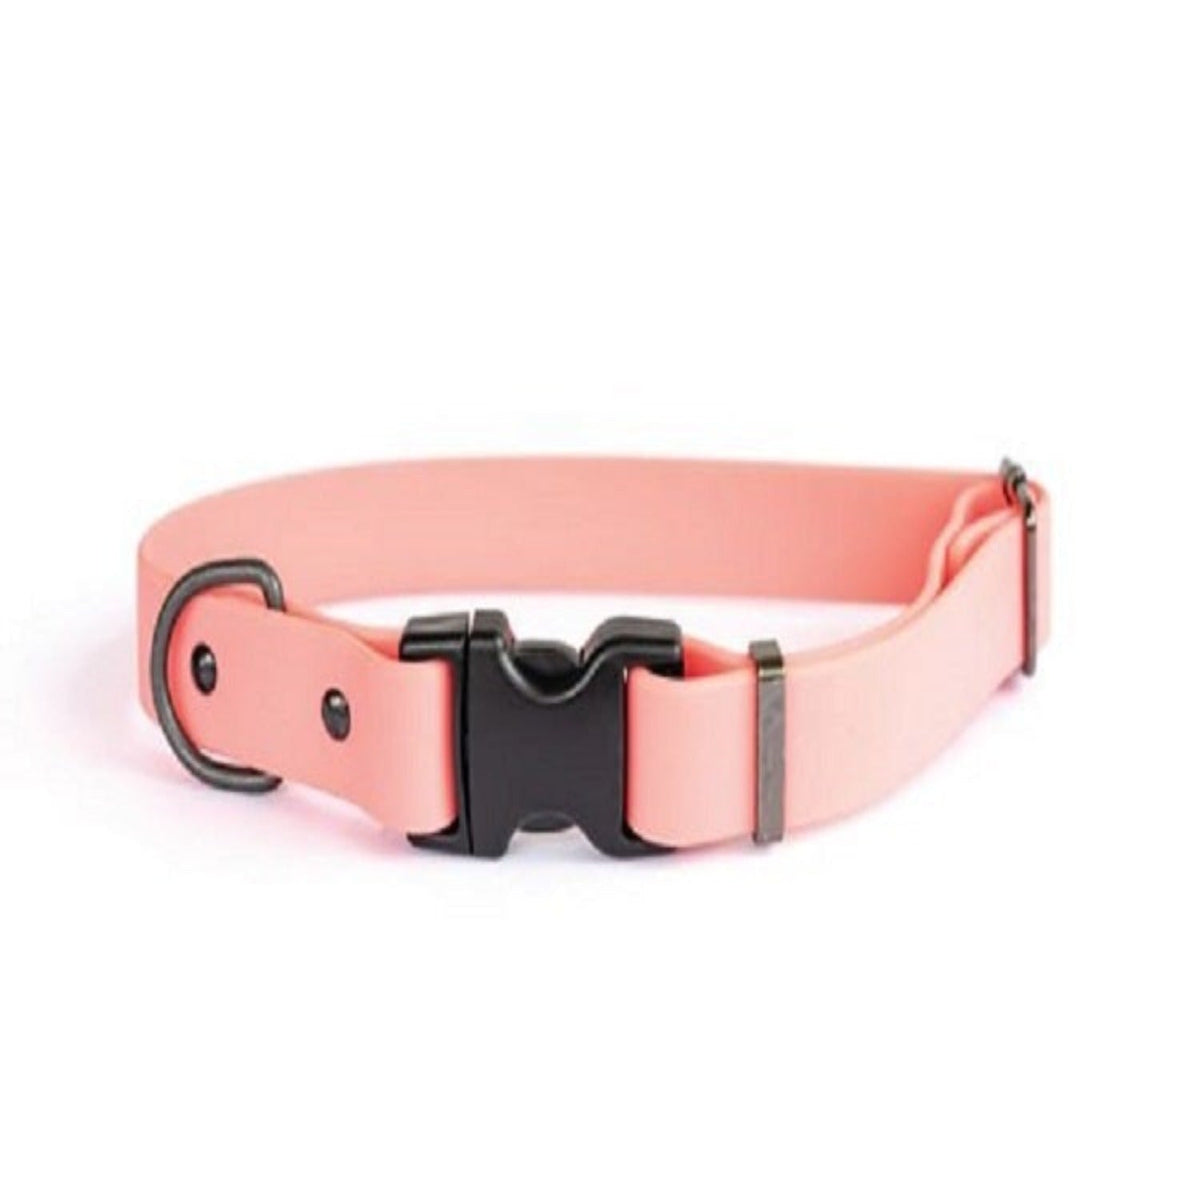 Waterproof Quick Release Dog Collar - Coral